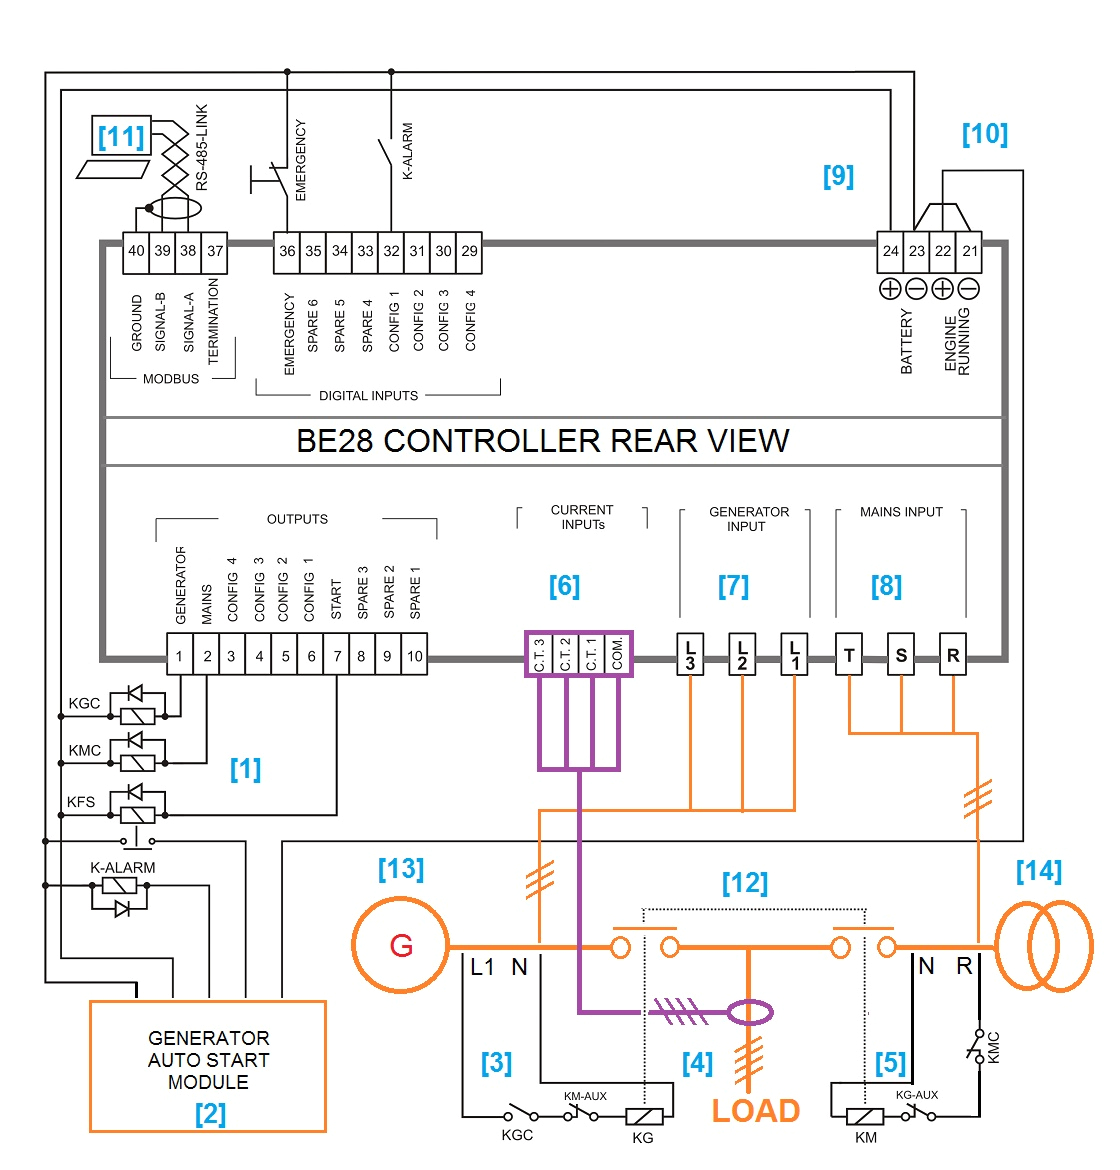 automatic transfer switch controller